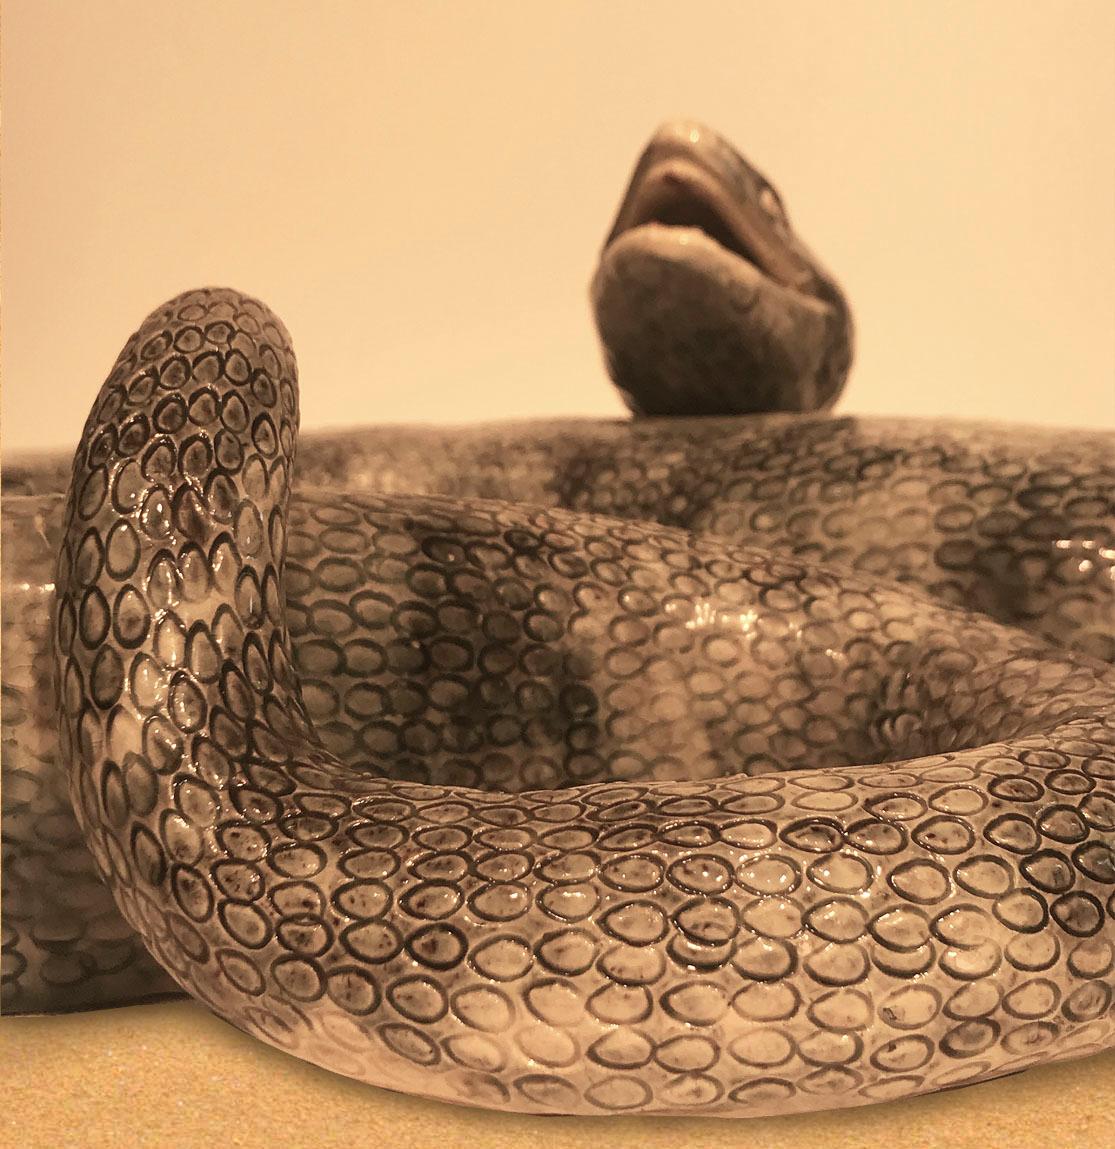 19th Century Manual Mafra Palissy Majolica Snake Wall Sculpture In Excellent Condition For Sale In London, United Kindgom